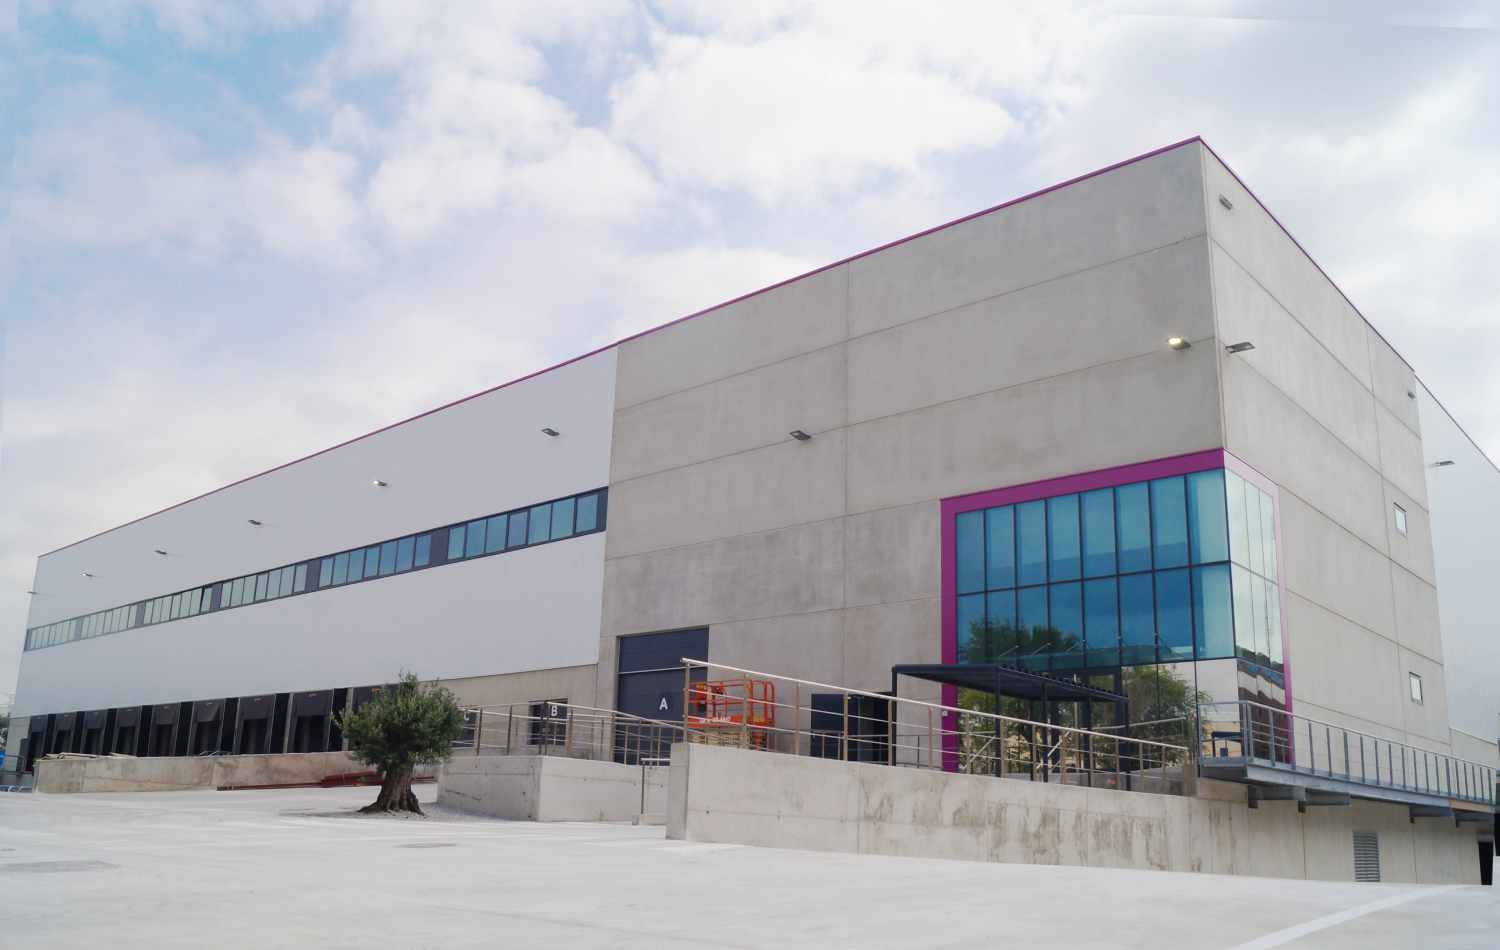 GSE Spain delivers Europe’s most state-of-the-art logistics centre